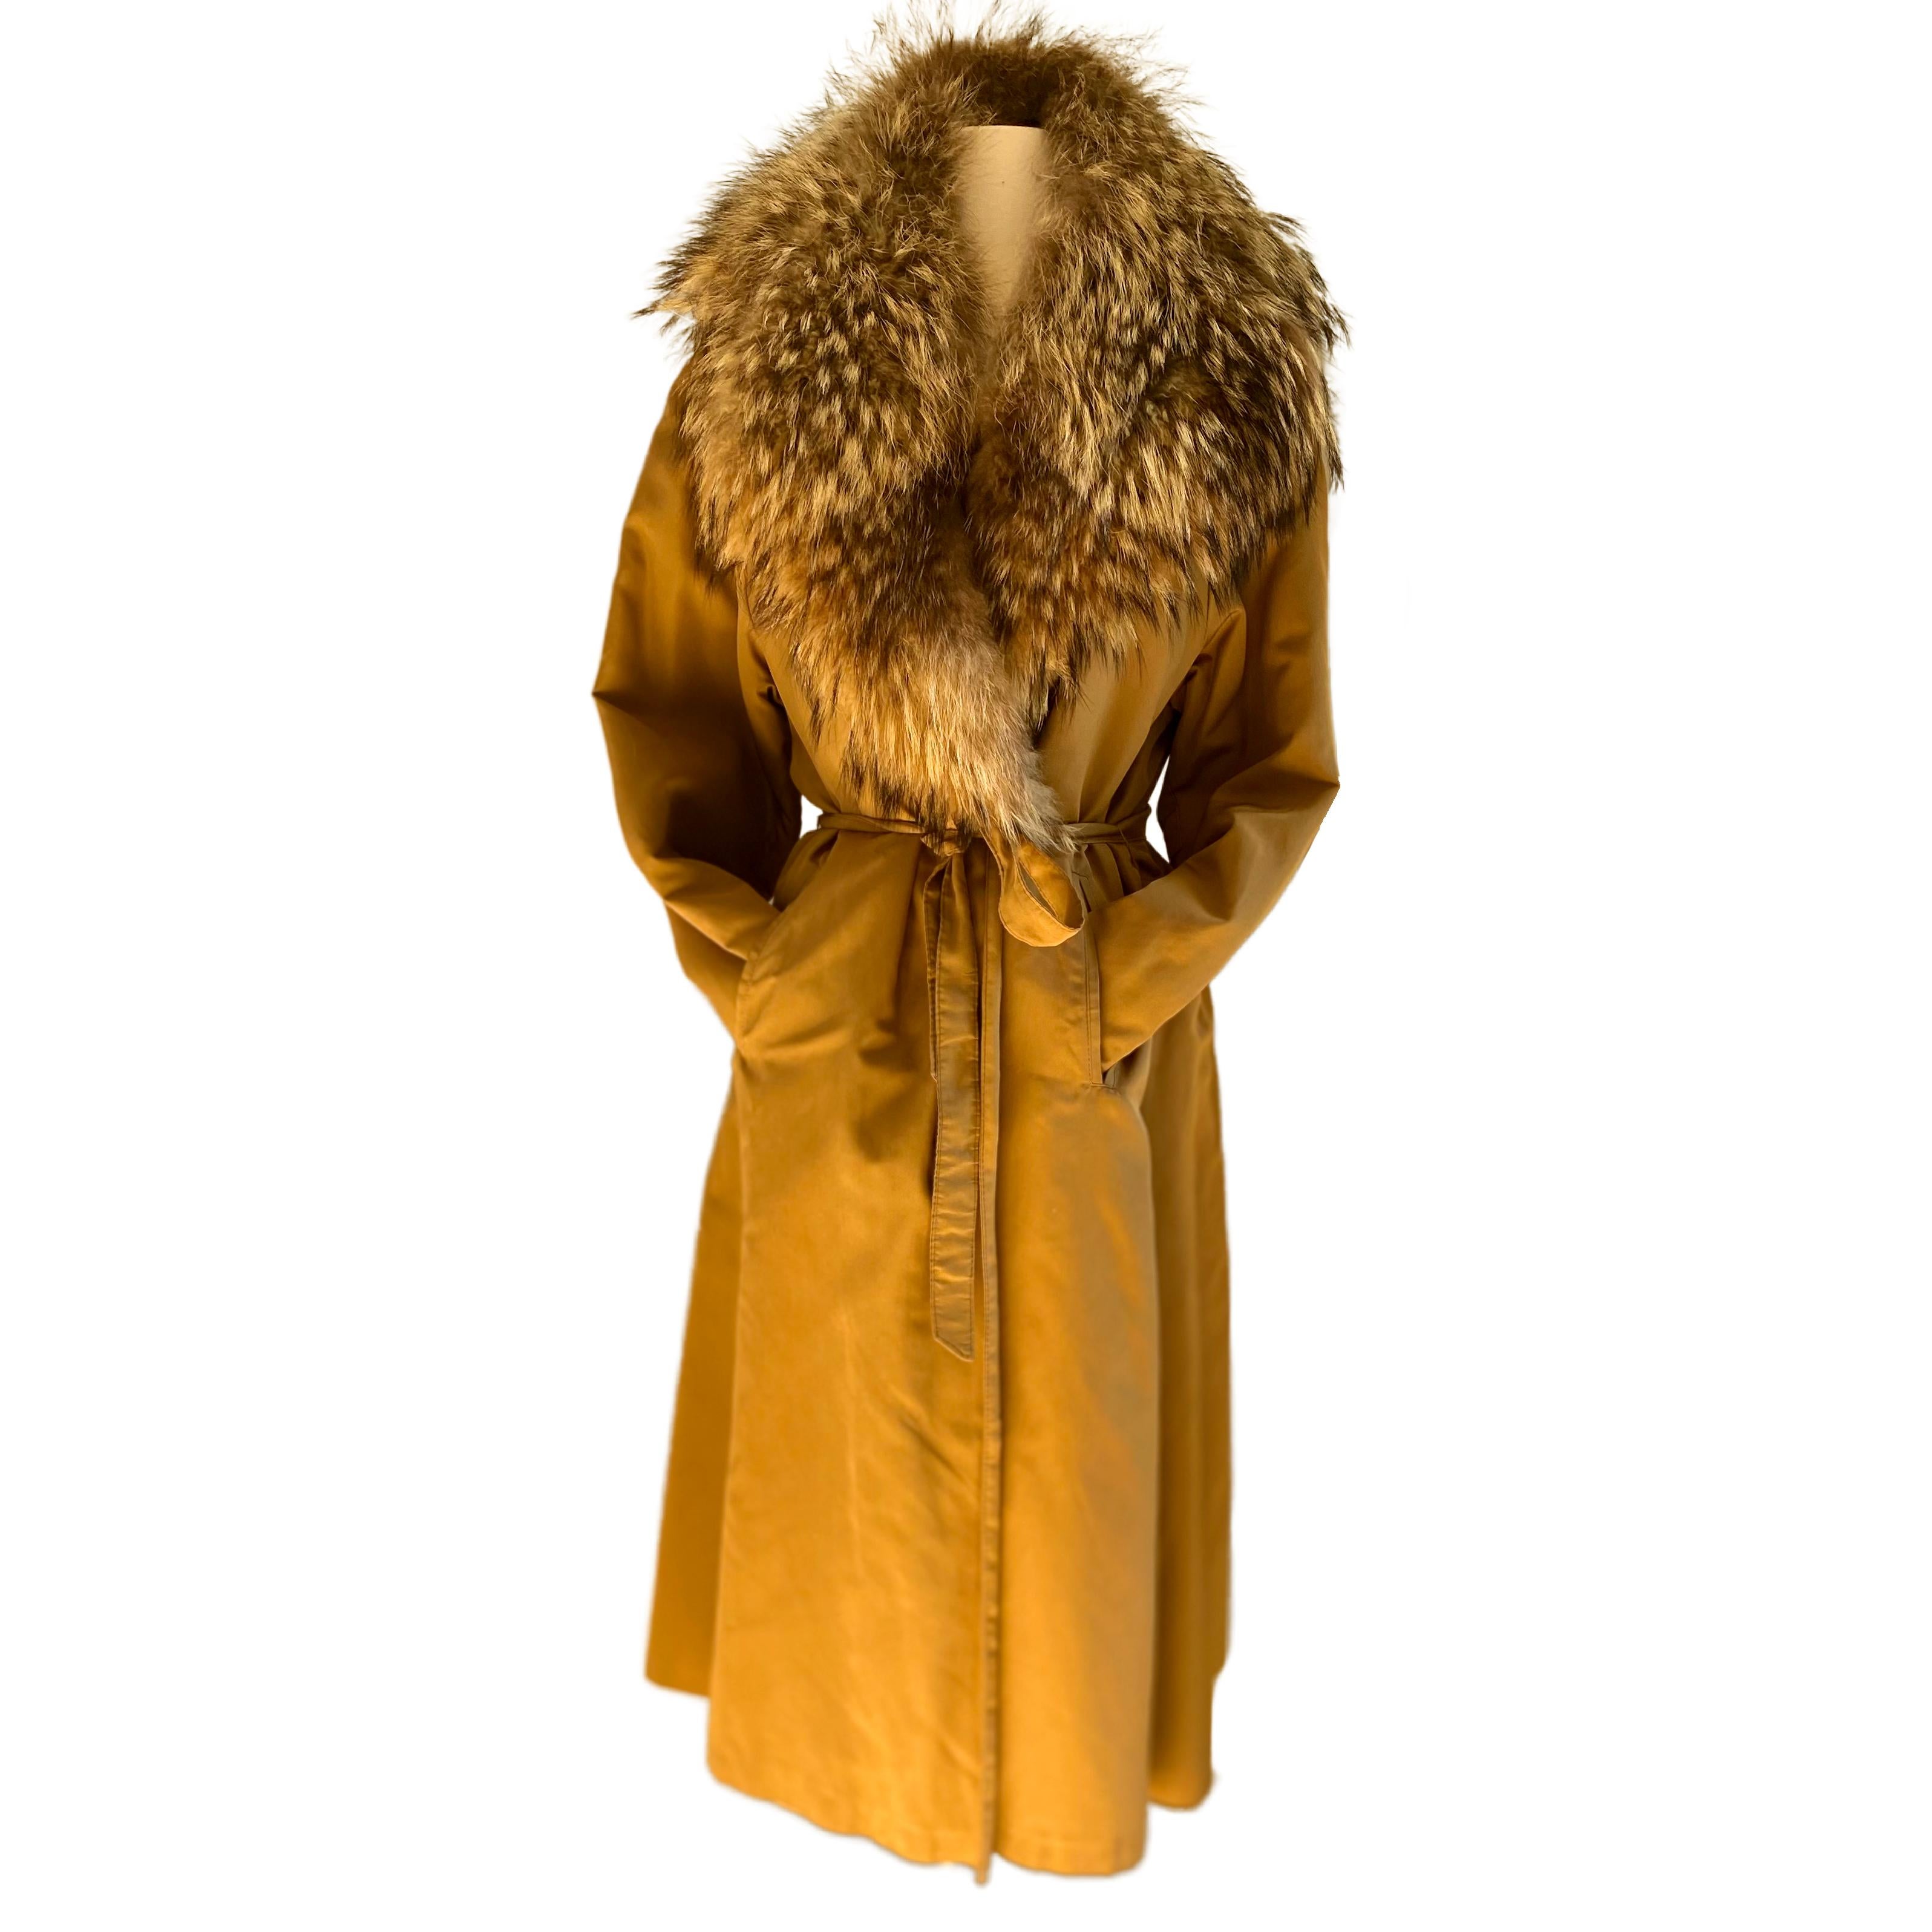 Made in Finland.
A chic, warm, practical, weather-proof (unsure if it is waterproof) coat from a legendary brand.
Collar fur from Finland (fox?)
Lining fur from the US (sheared beaver? sheared mink? Sorry we know little about fur)
Detachable fur